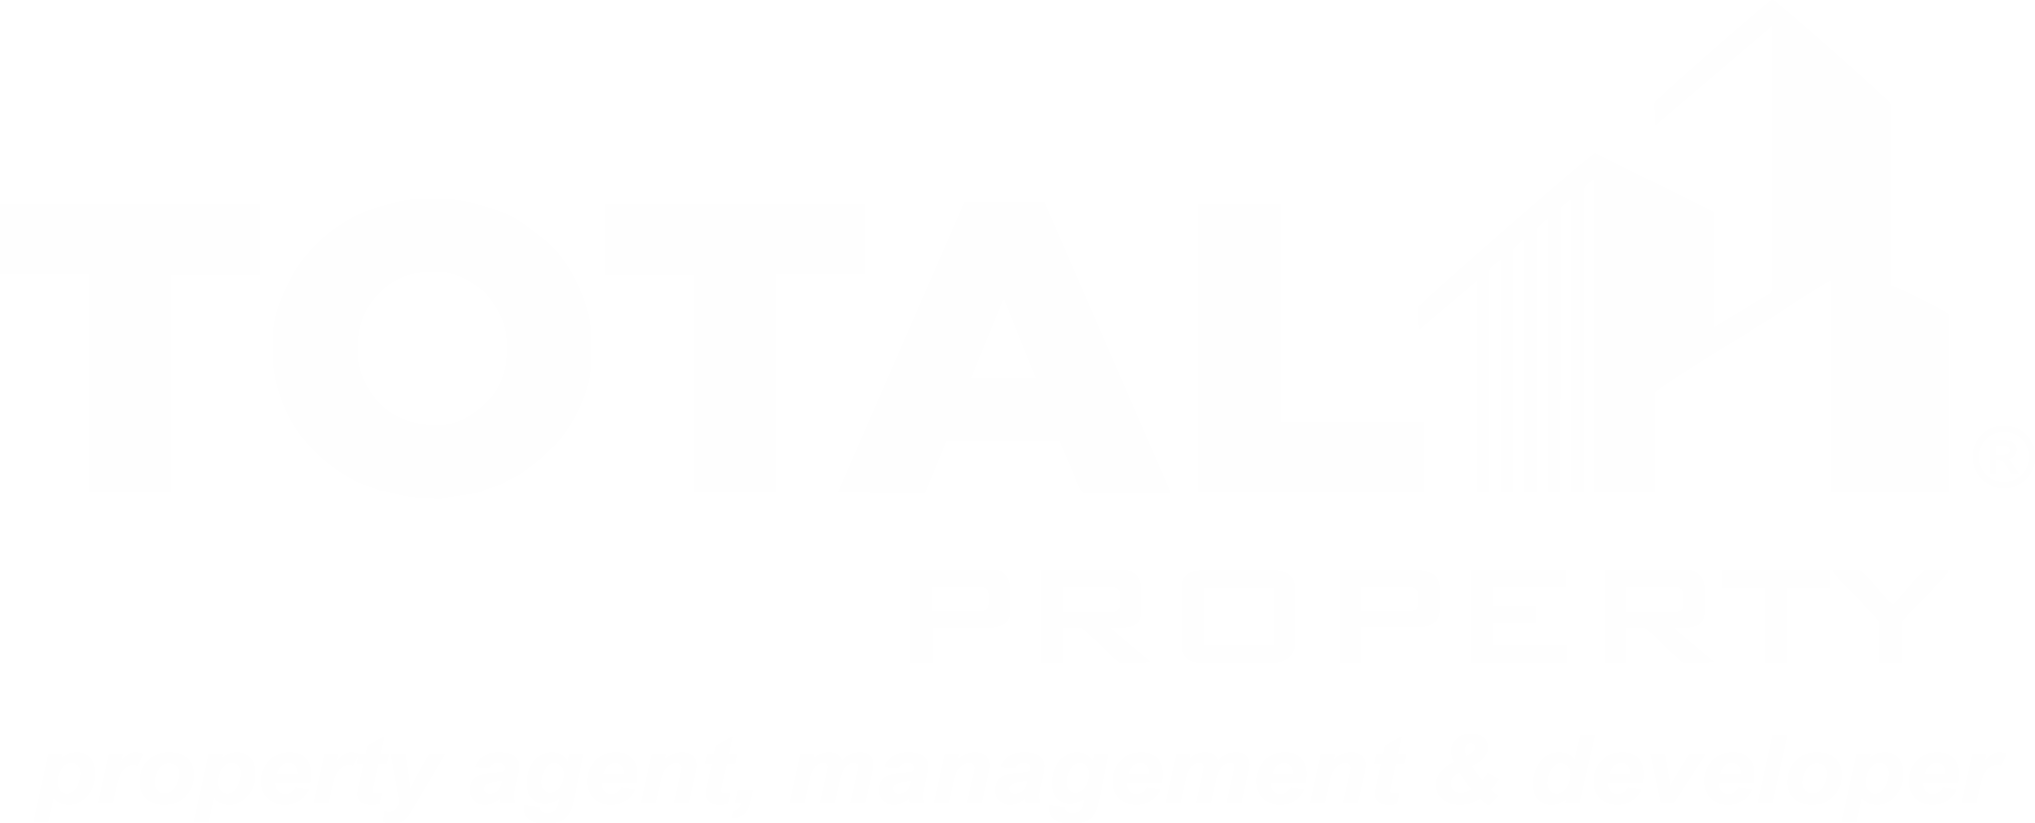 Total Property